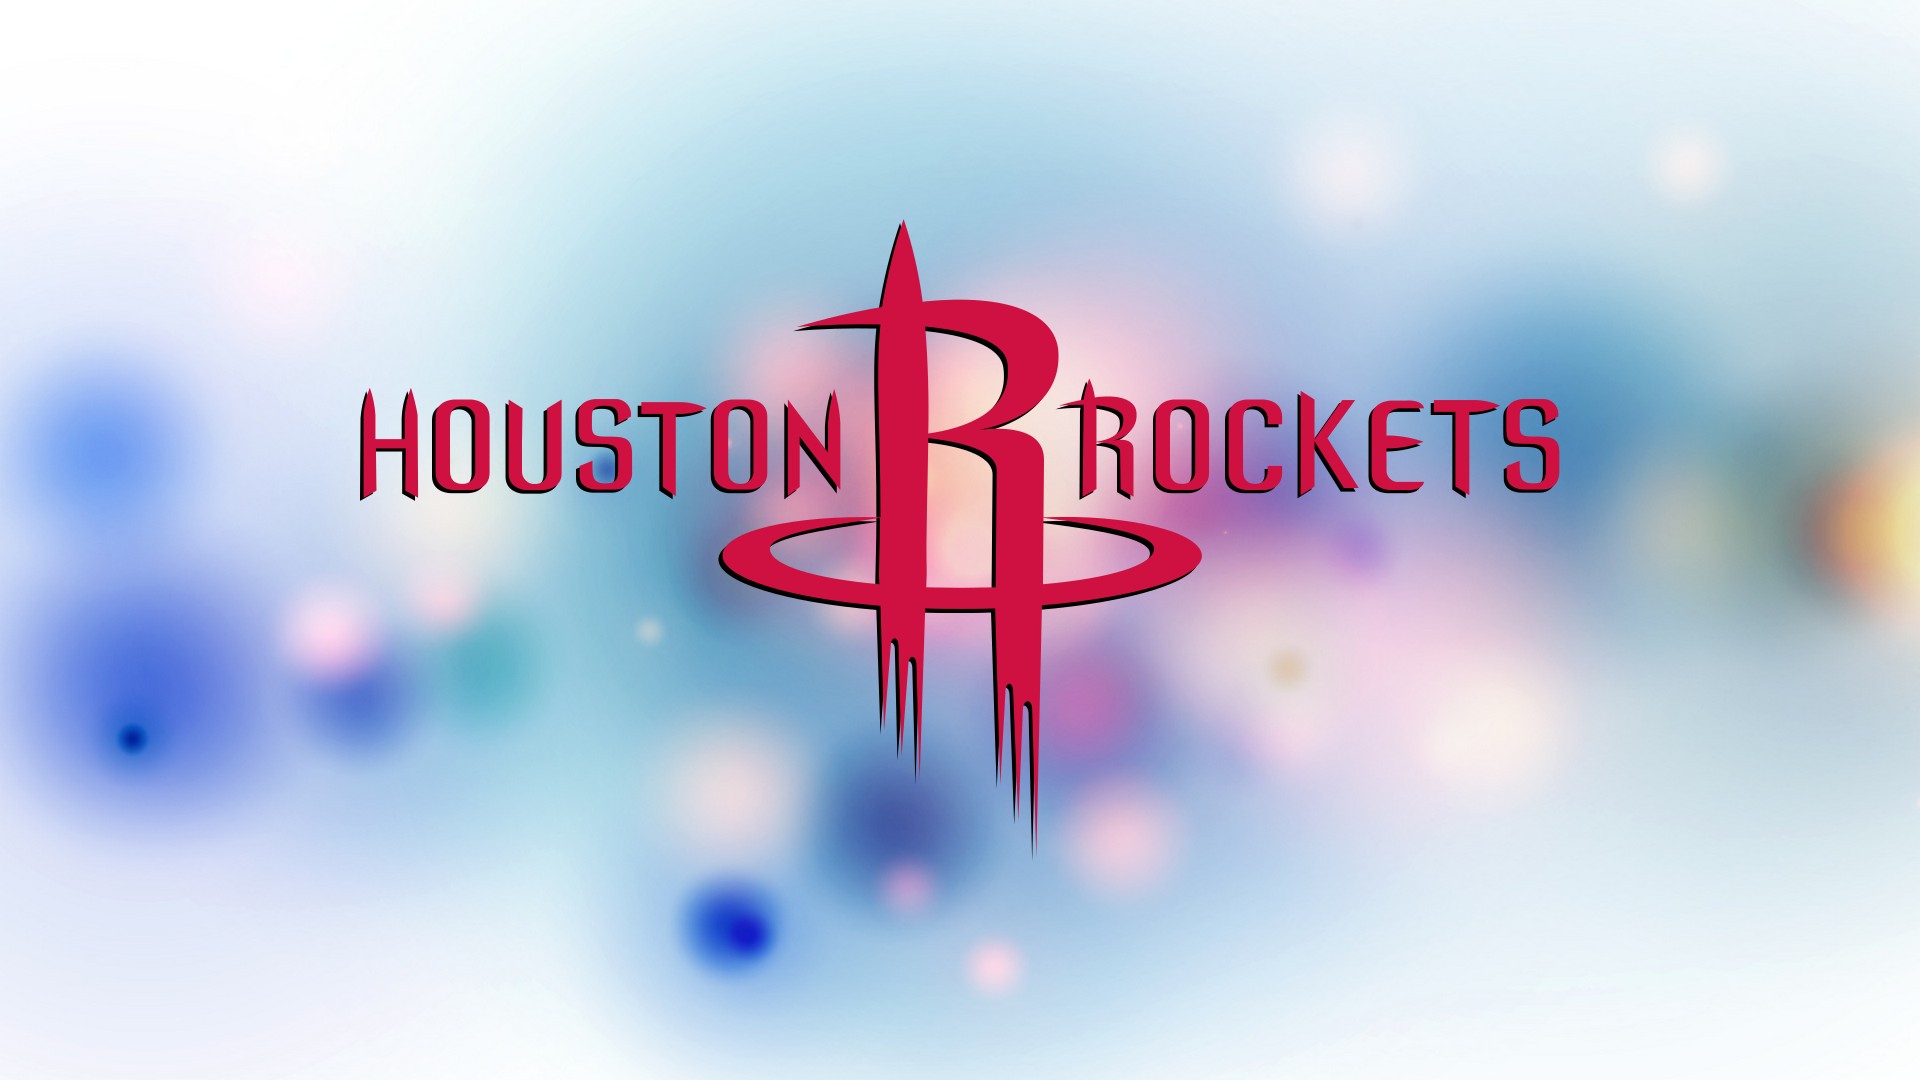 Houston Rockets Mac Backgrounds with image dimensions 1920x1080 pixel. You can make this wallpaper for your Desktop Computer Backgrounds, Windows or Mac Screensavers, iPhone Lock screen, Tablet or Android and another Mobile Phone device